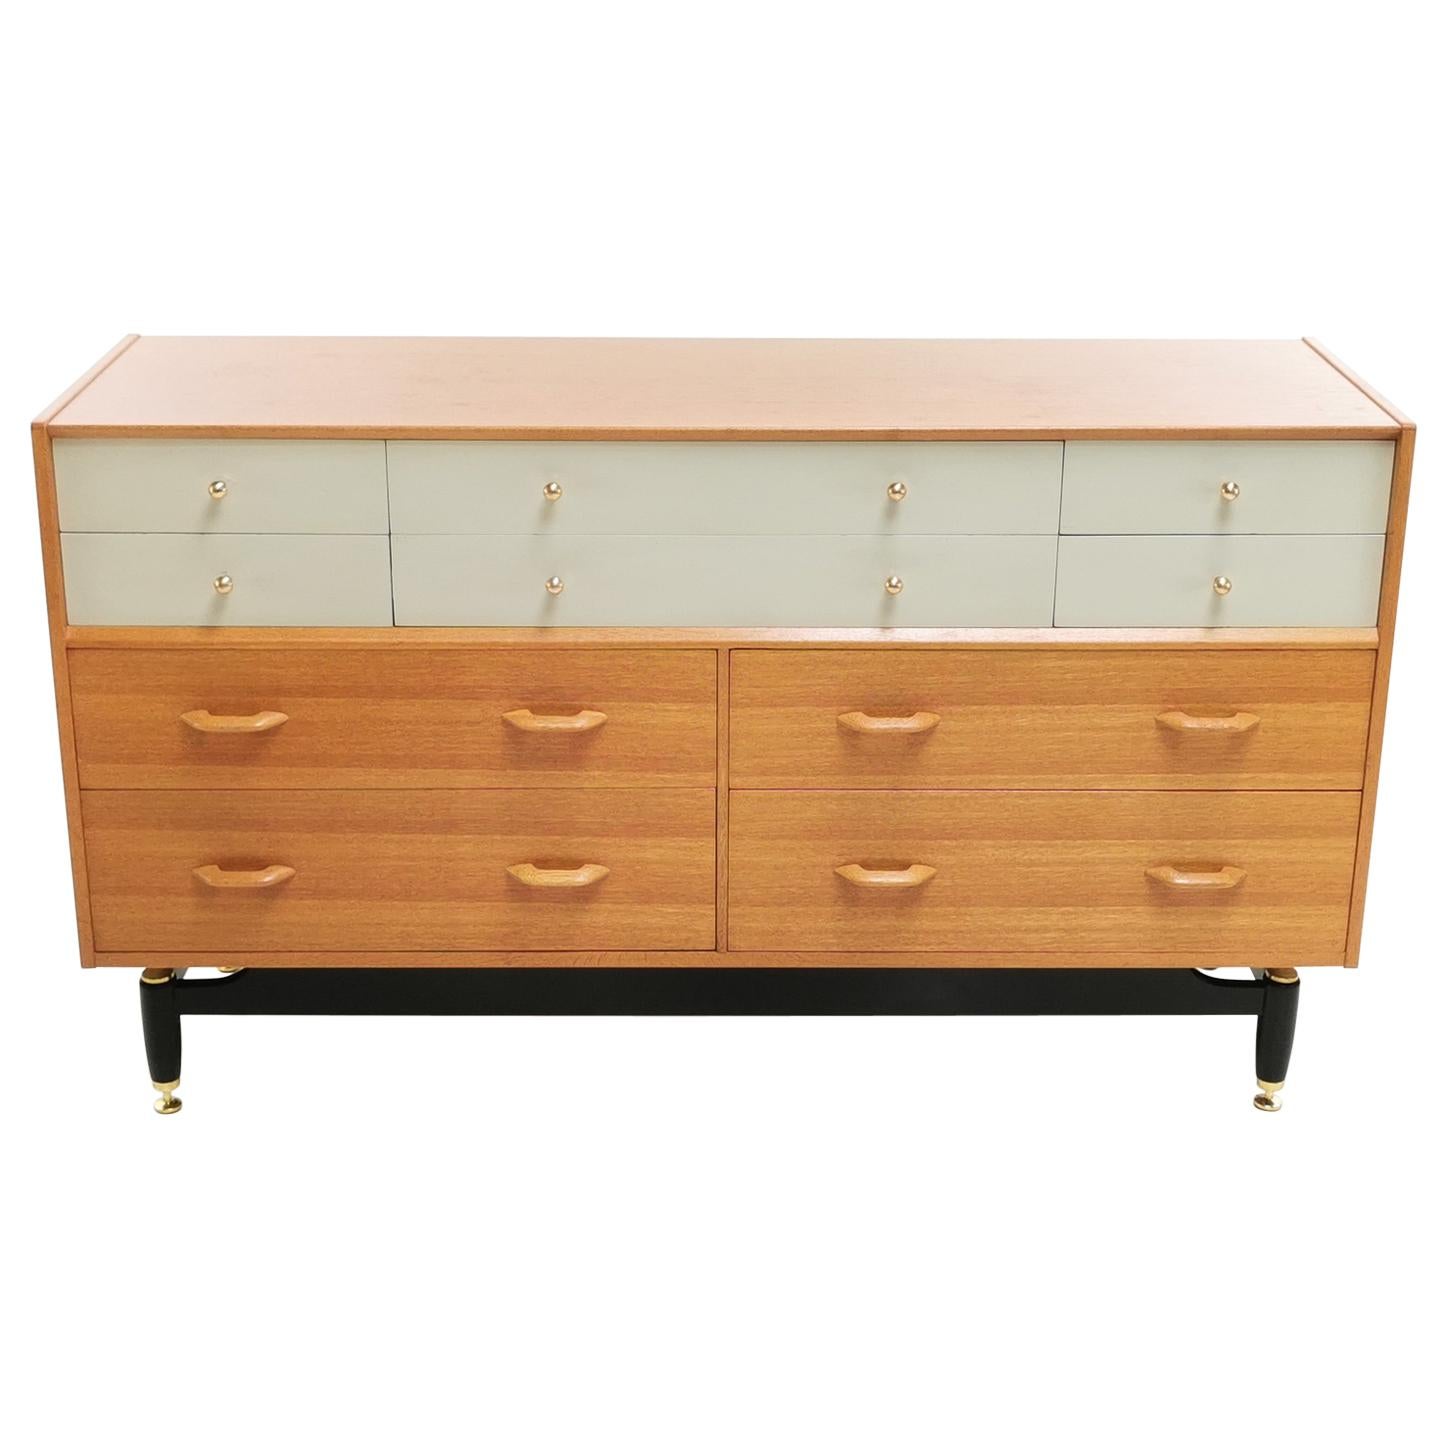 G Plan China White Oak Sideboard Chest of Drawers Midcentury